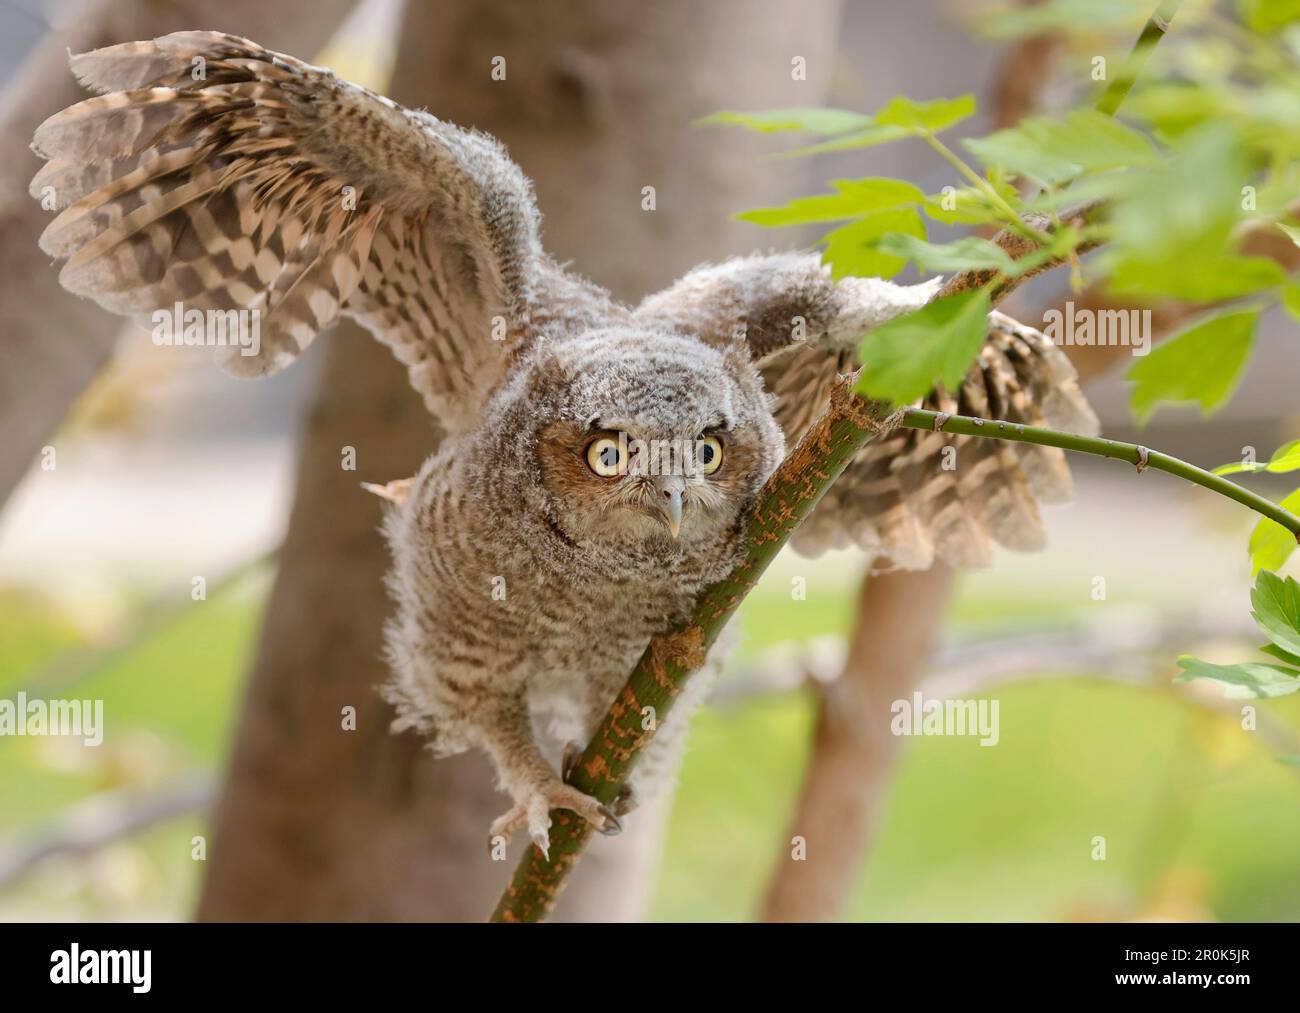 A Cute Fuzzy Owl with an Adorable Little Hat - Cute Owl - Posters